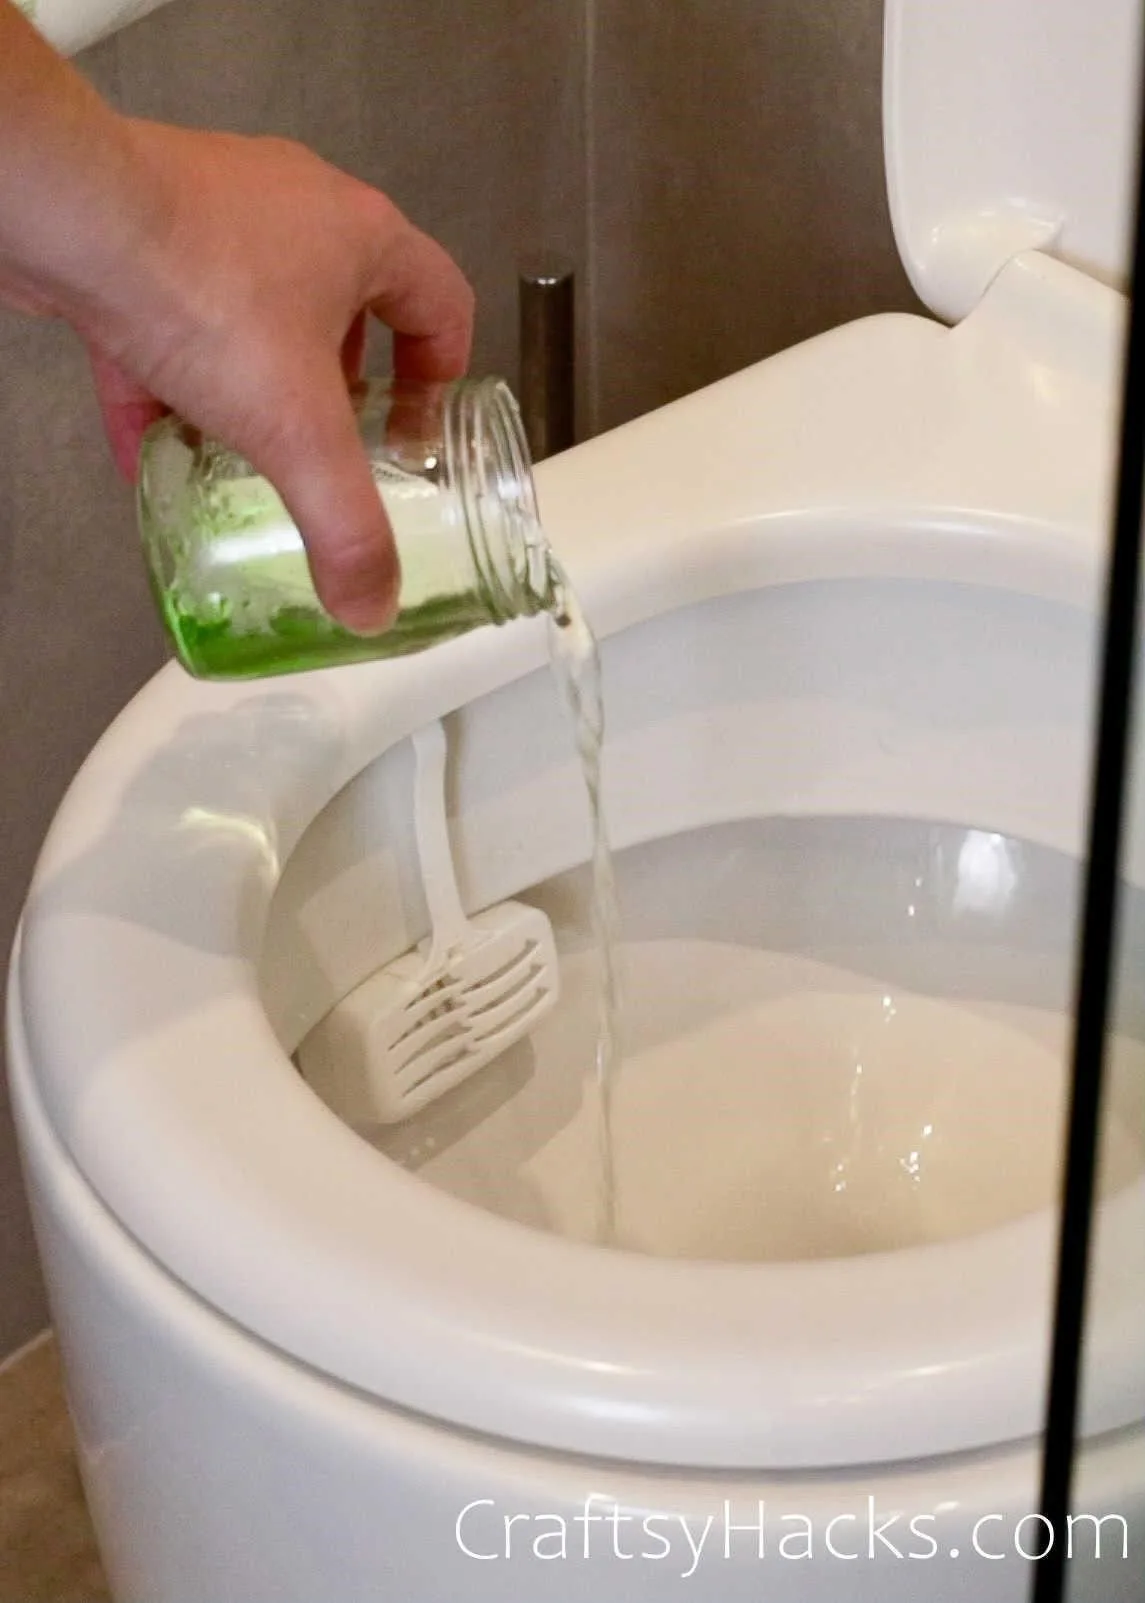 add dish soap to toilet